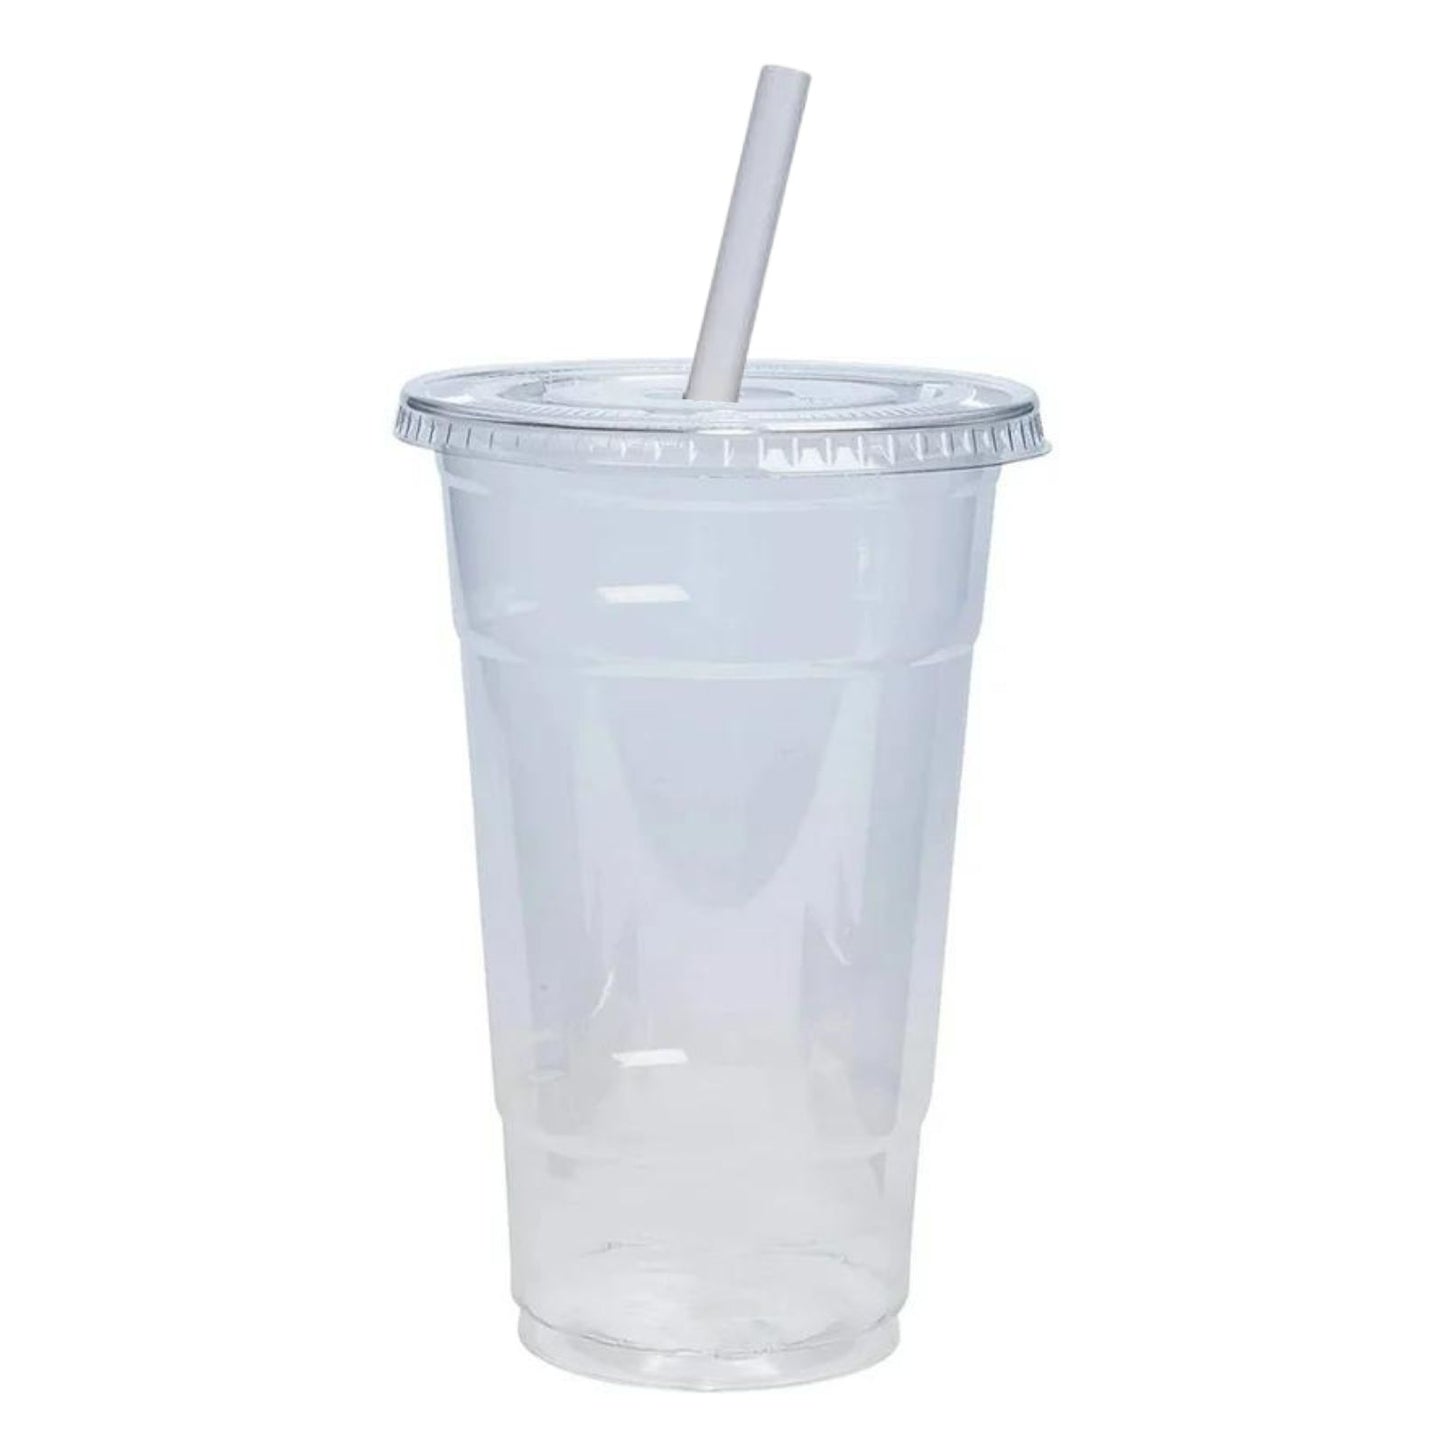 12oz Plastic Clear PET Cups With Flat Lid & Straw, for All Kinds of Beverages Smoothie Cups VeZee Cups/Lids/Straws 10 Pack 